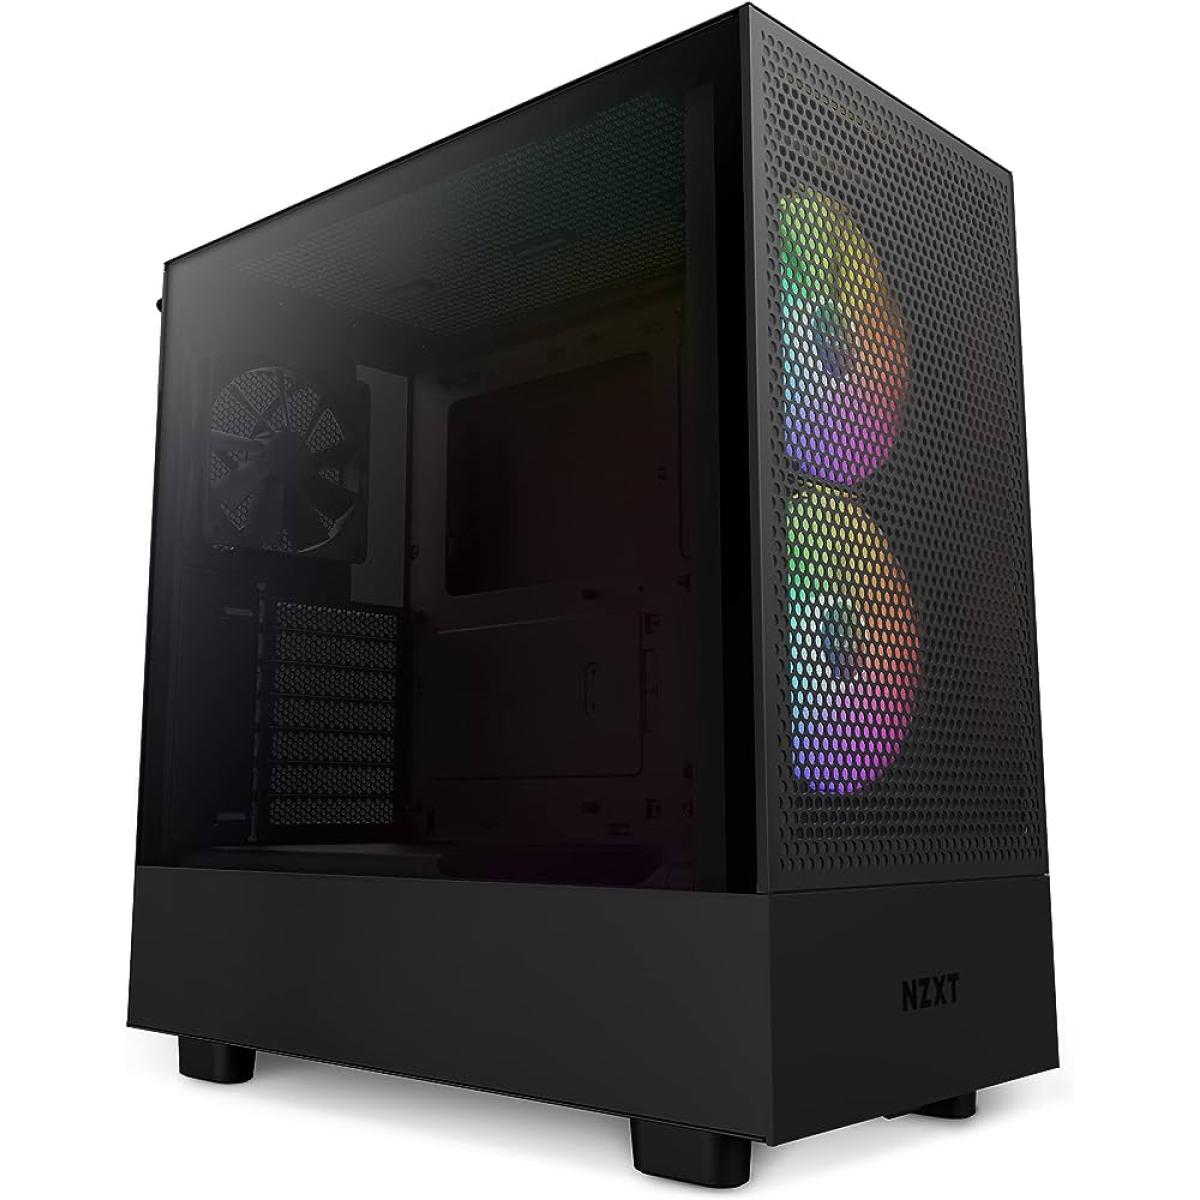 NZXT H5 Flow RGB ATX Tempered Glass Mid Tower (BLACK) Gaming Case